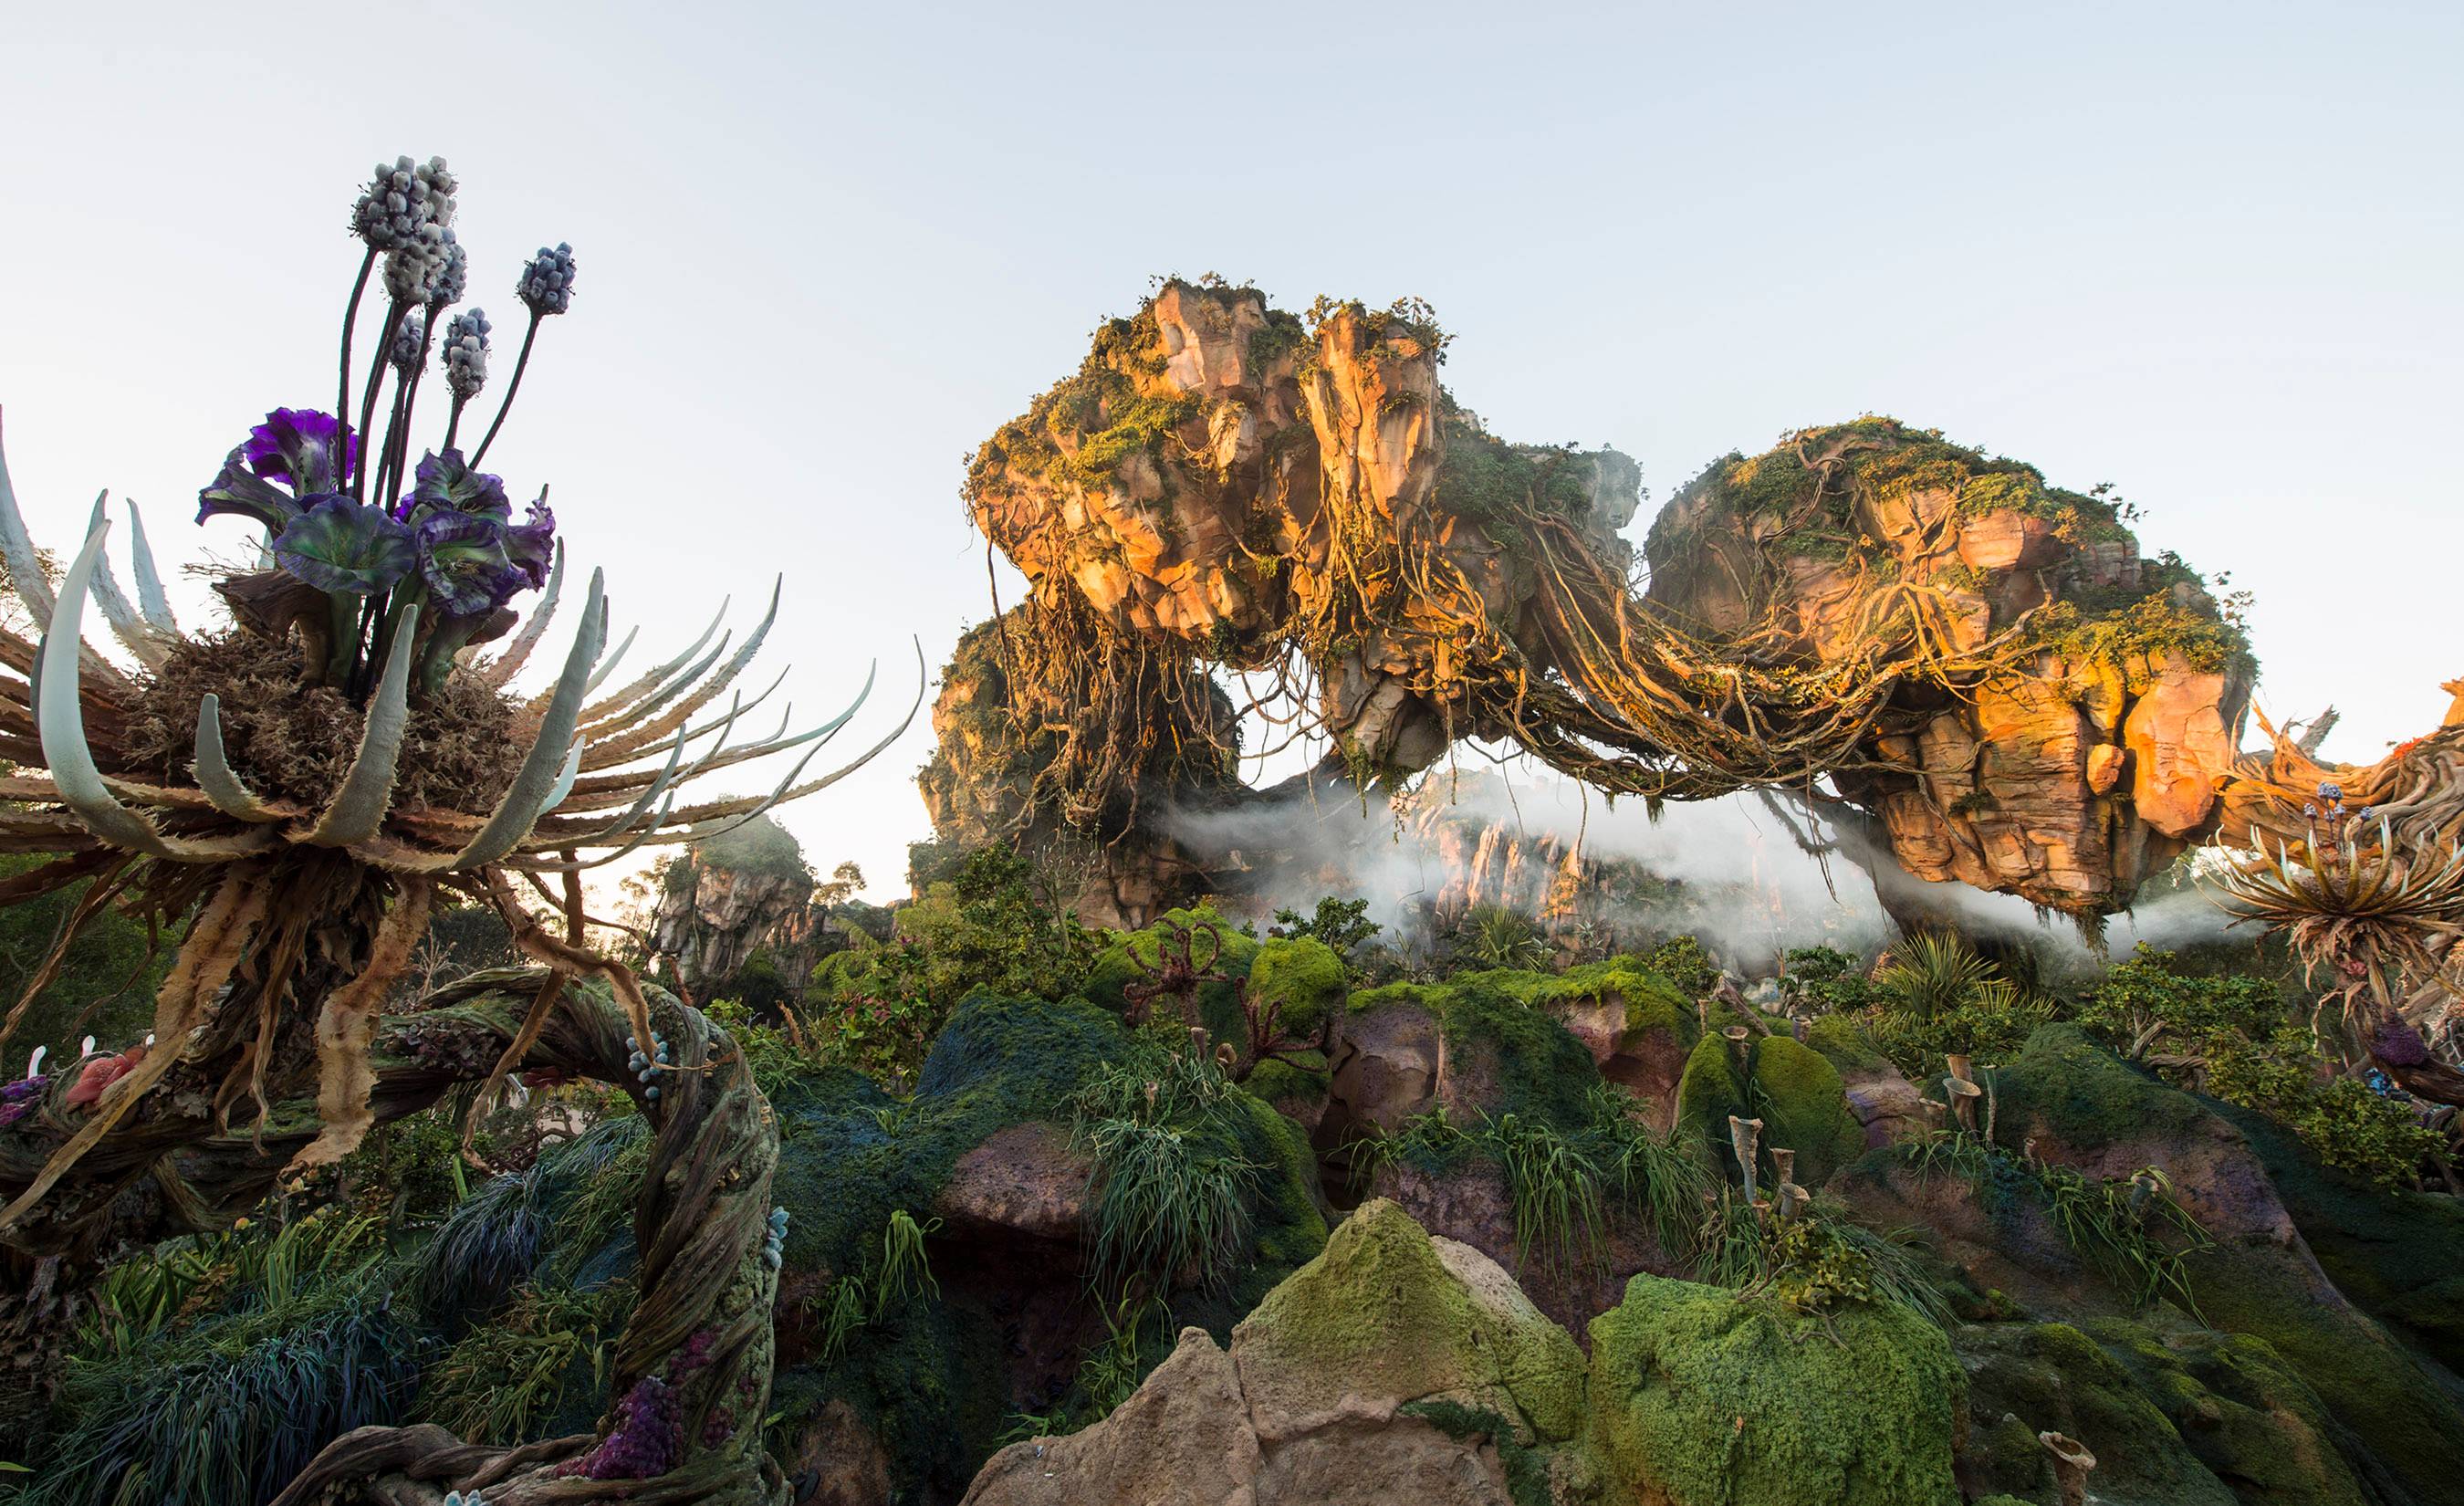 PHOTO - New shot from inside Pandora - The World of Avatar and description of the land